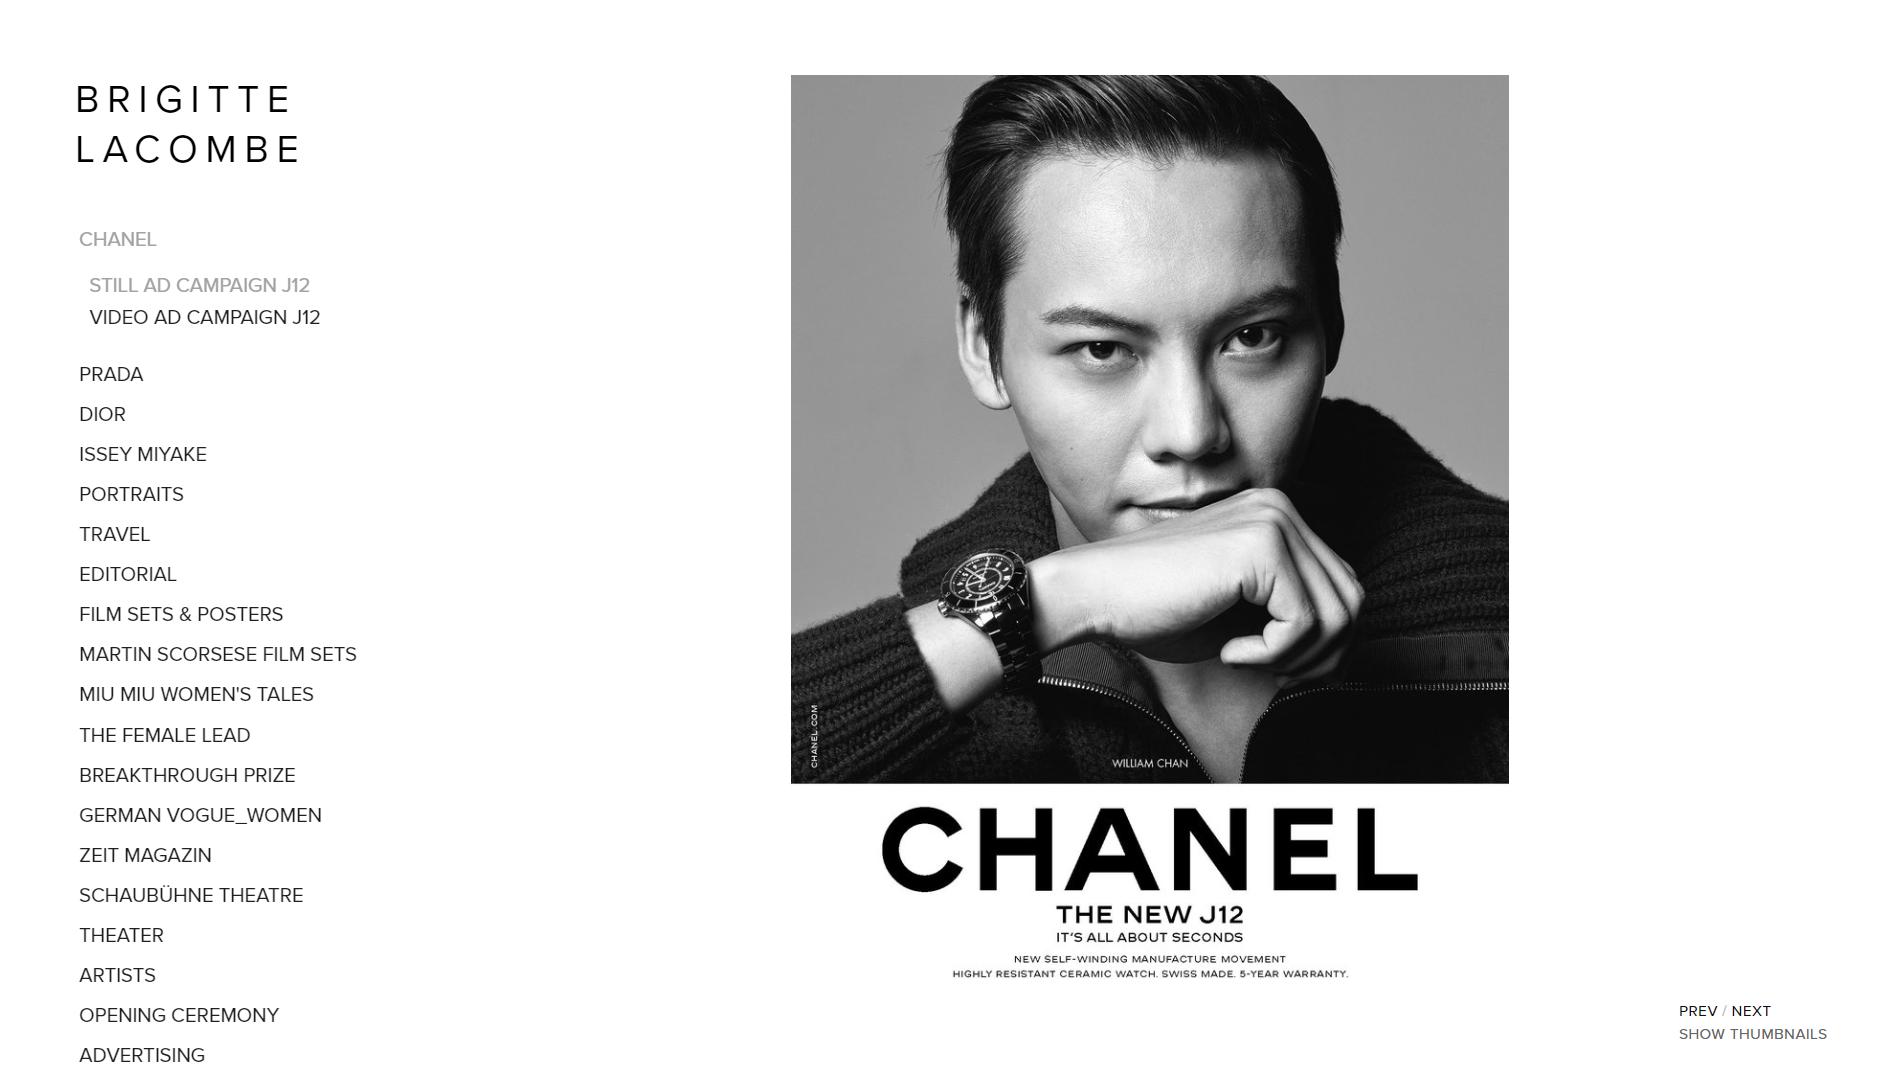 William Chan Fans on Twitter: "William Chan X Chanel J12 It's all  image